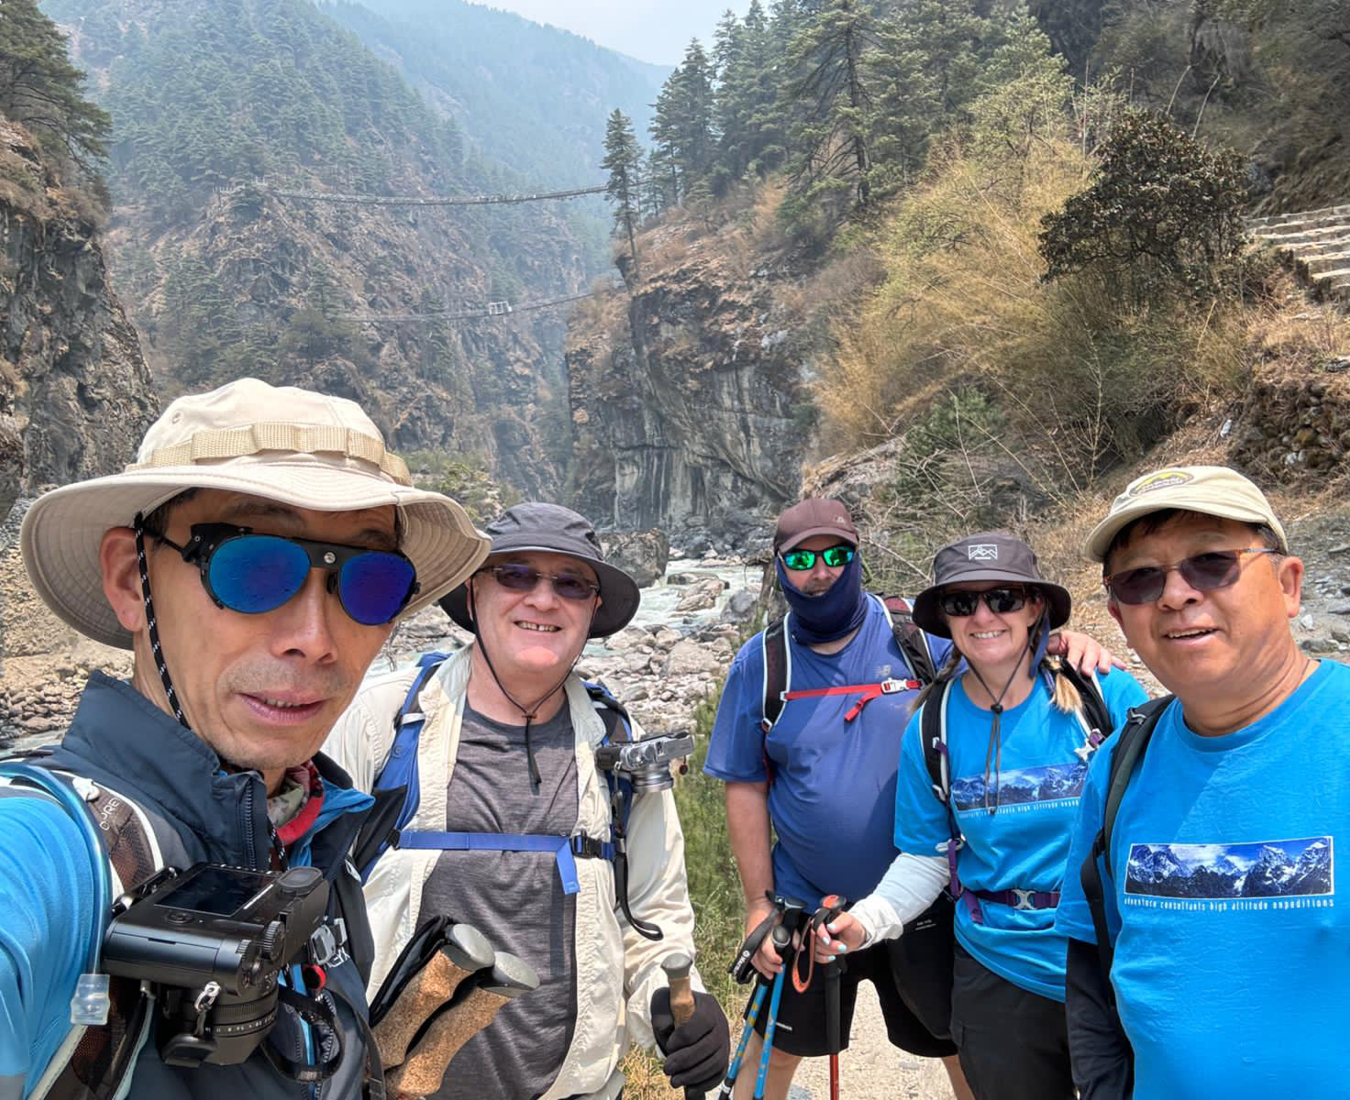 The Three Passes Nepal 2024 #1 Team, stop for a group selfie just before the Namche bridge seen in the hazy distance between tree clad hills.